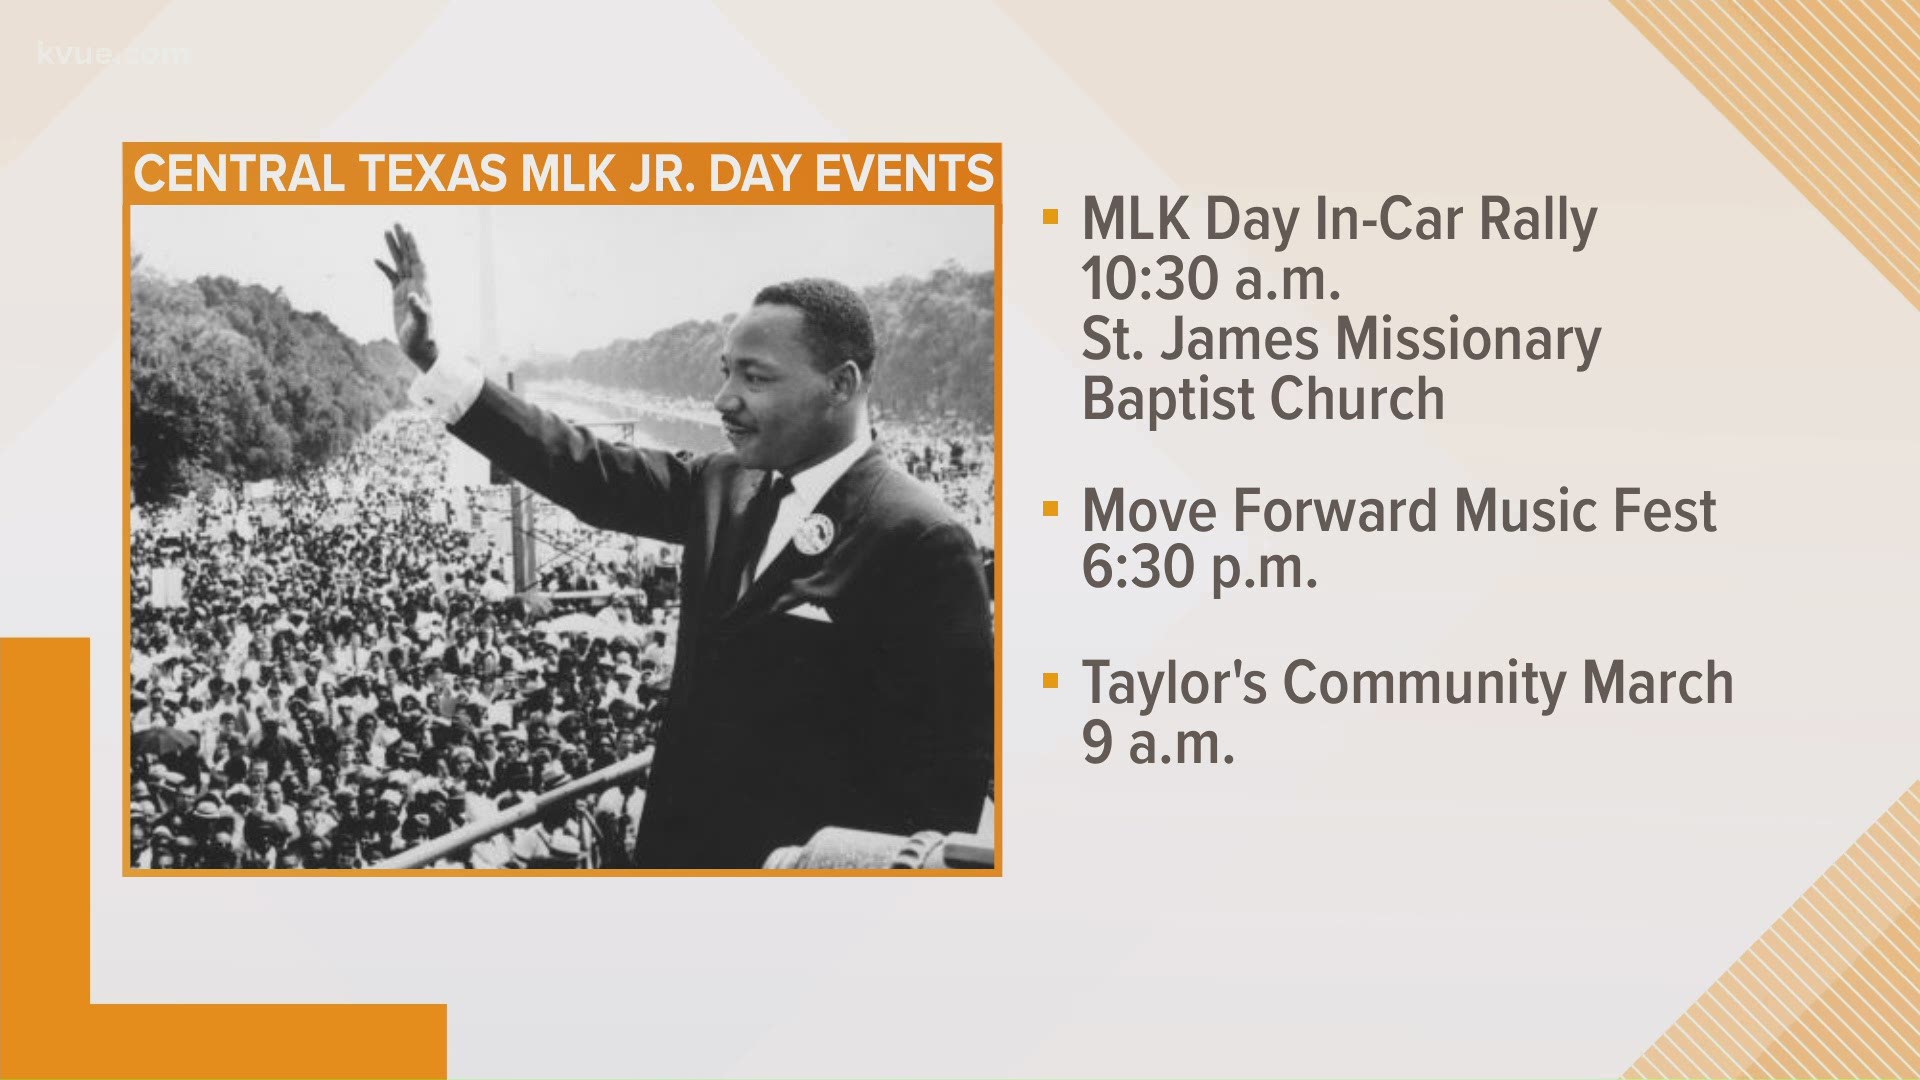 There are a few events happening in Central Texas in honor of Martin Luther King Jr. Day.